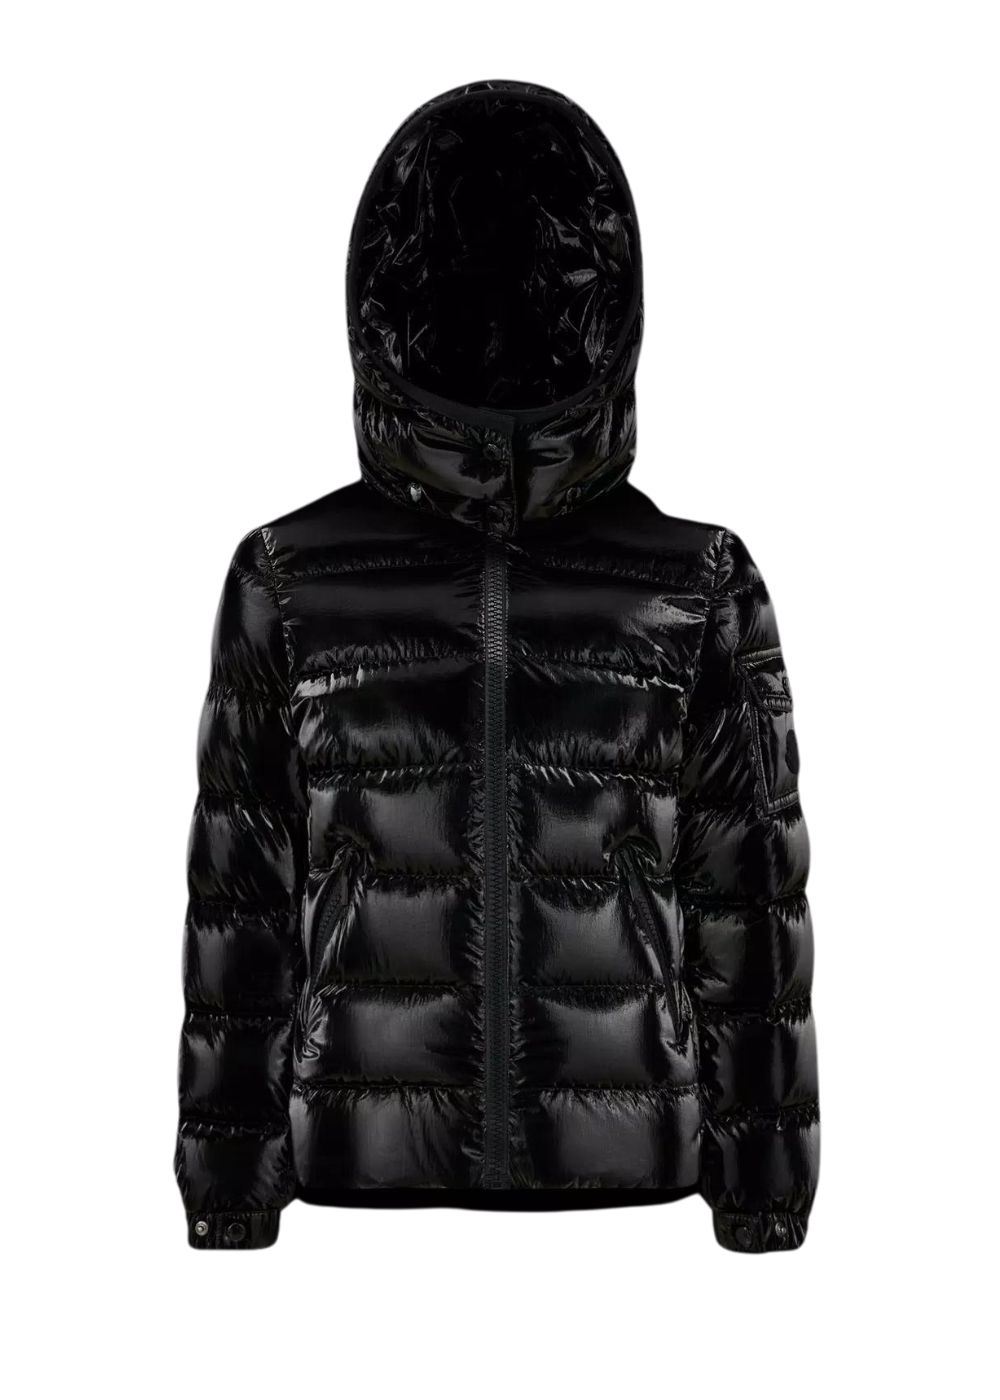 Featured image for “Moncler Bady Nero”